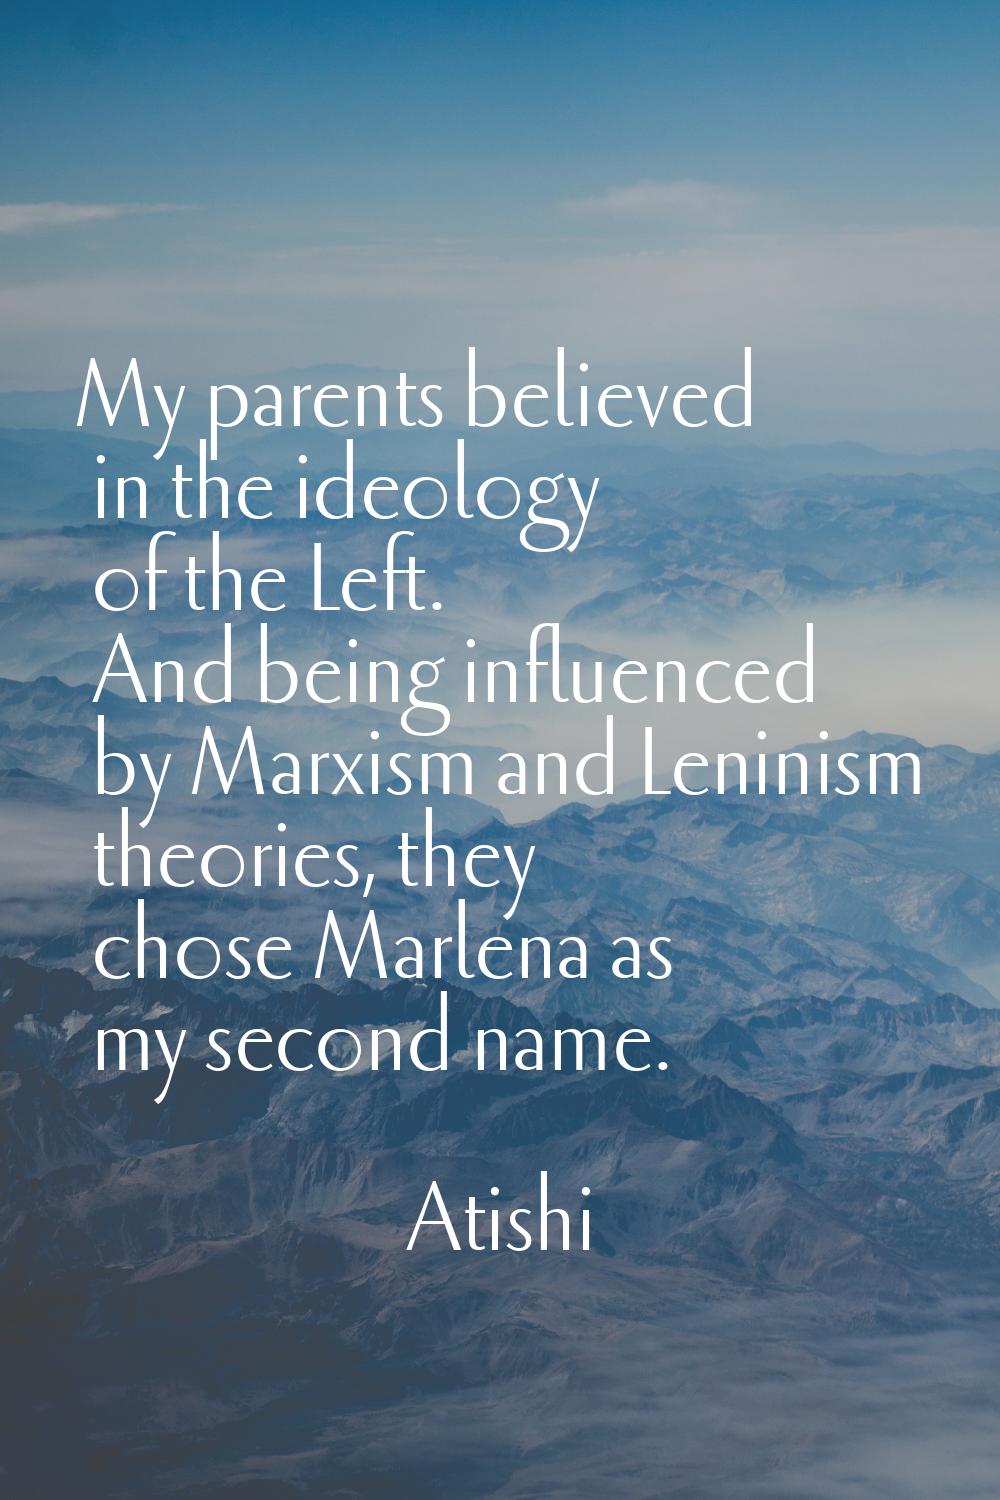 My parents believed in the ideology of the Left. And being influenced by Marxism and Leninism theor